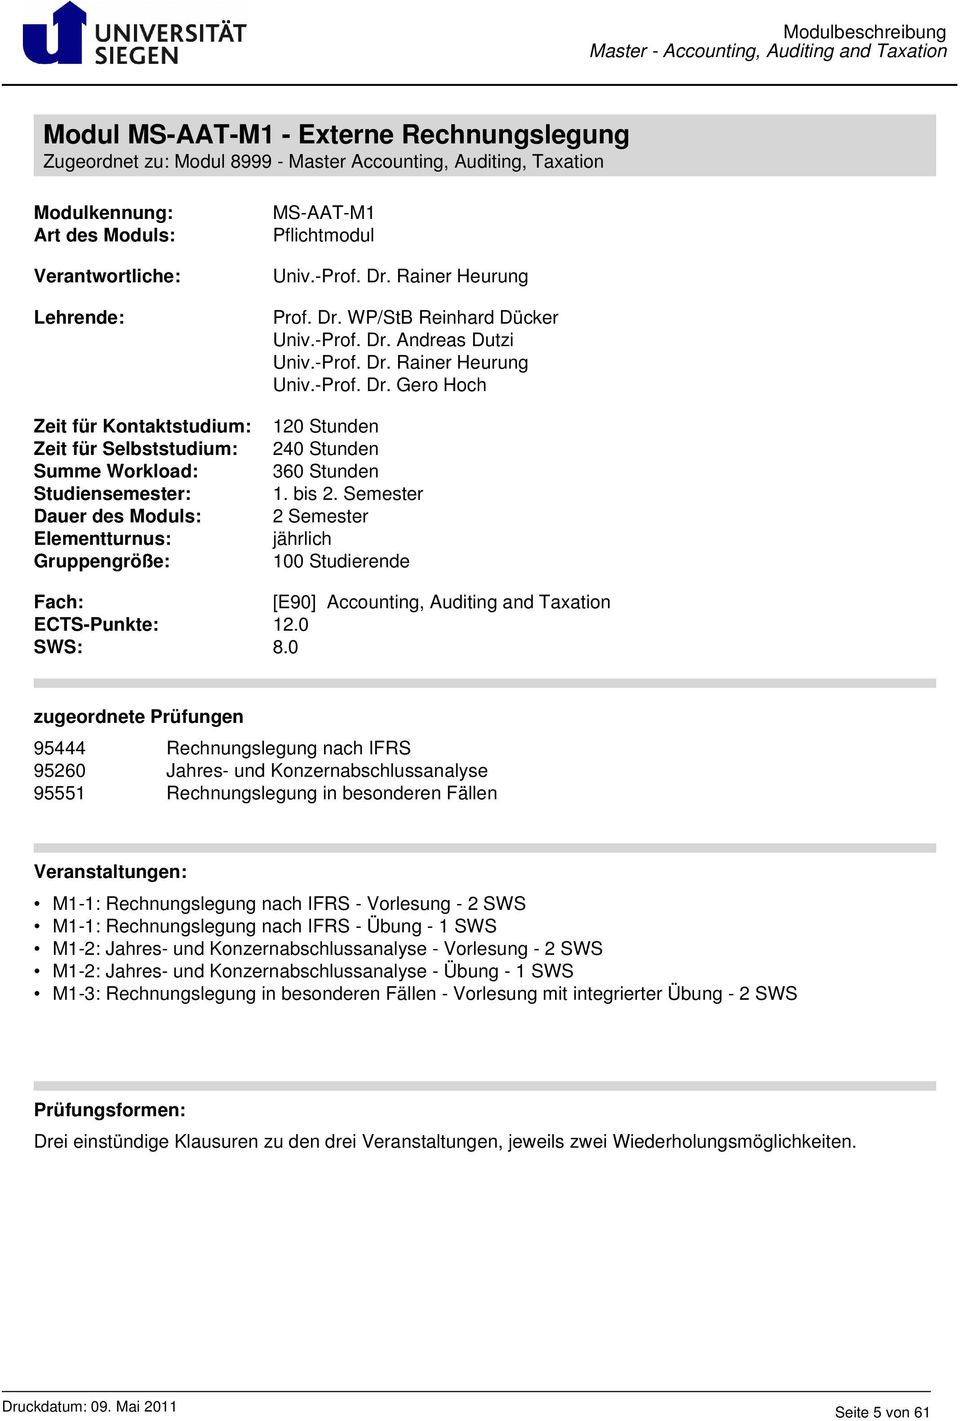 bis 2. Semester 2 Semester jährlich 100 Studierende [E90] Accounting, Auditing and Taxation ECTS-Punkte: 12.0 SWS: 8.